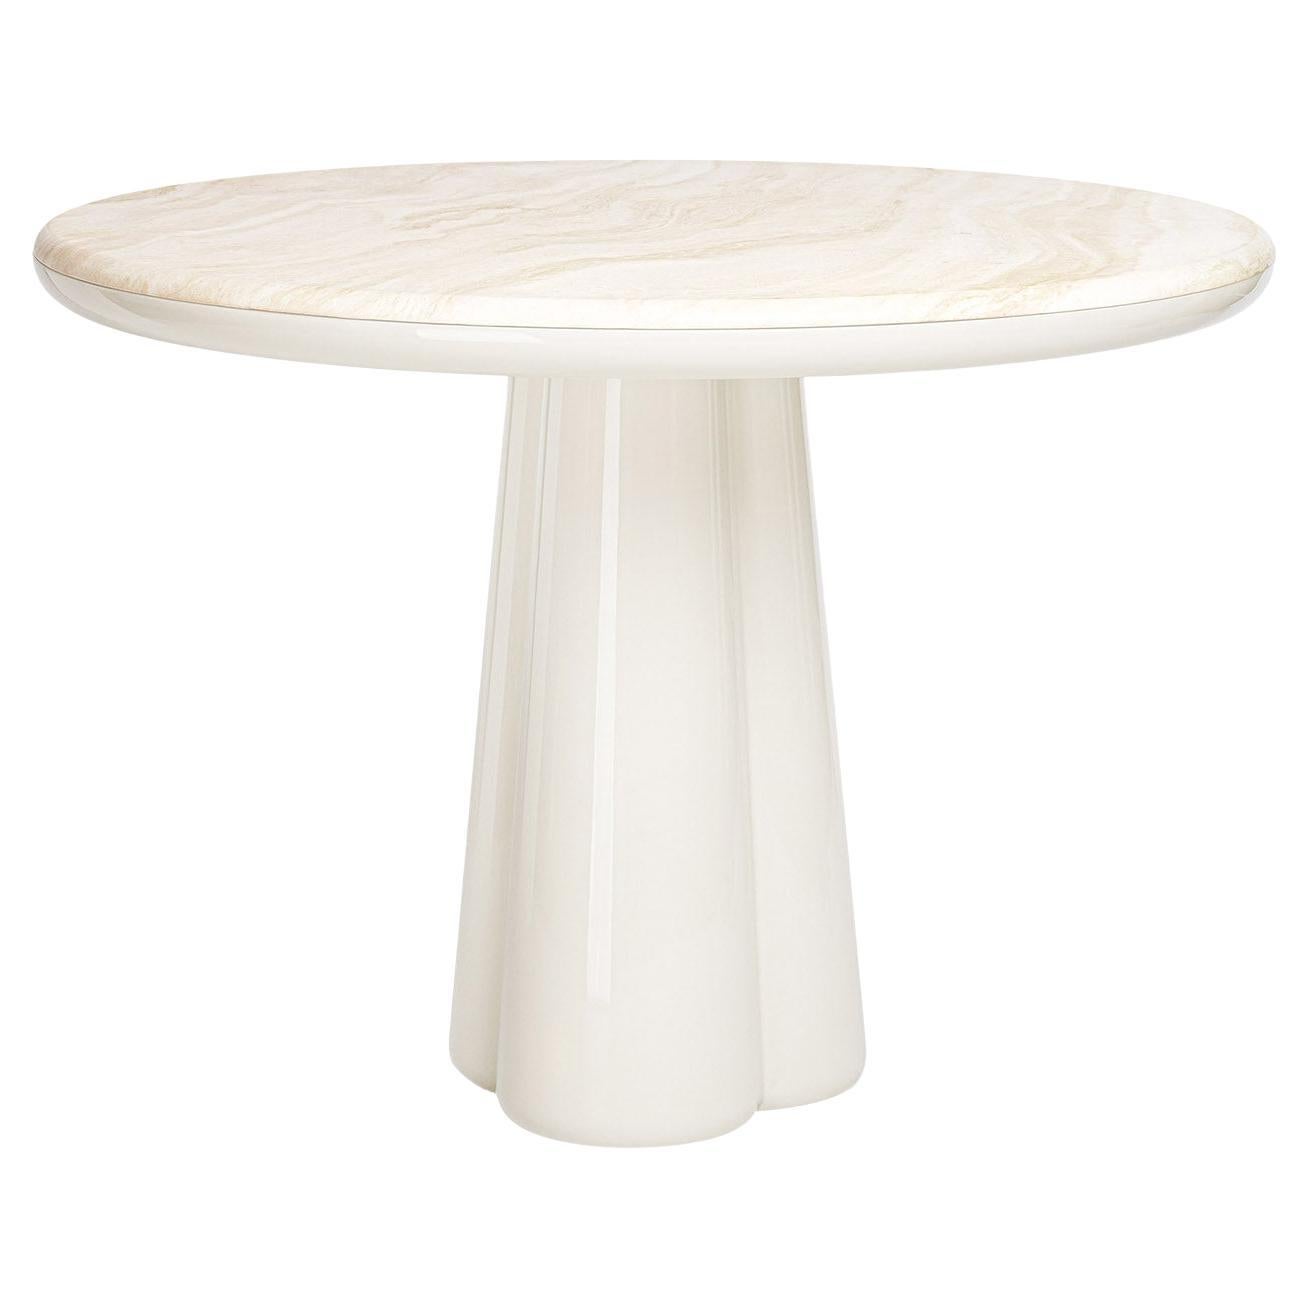 Scapin Collezioni Dining Room Tables